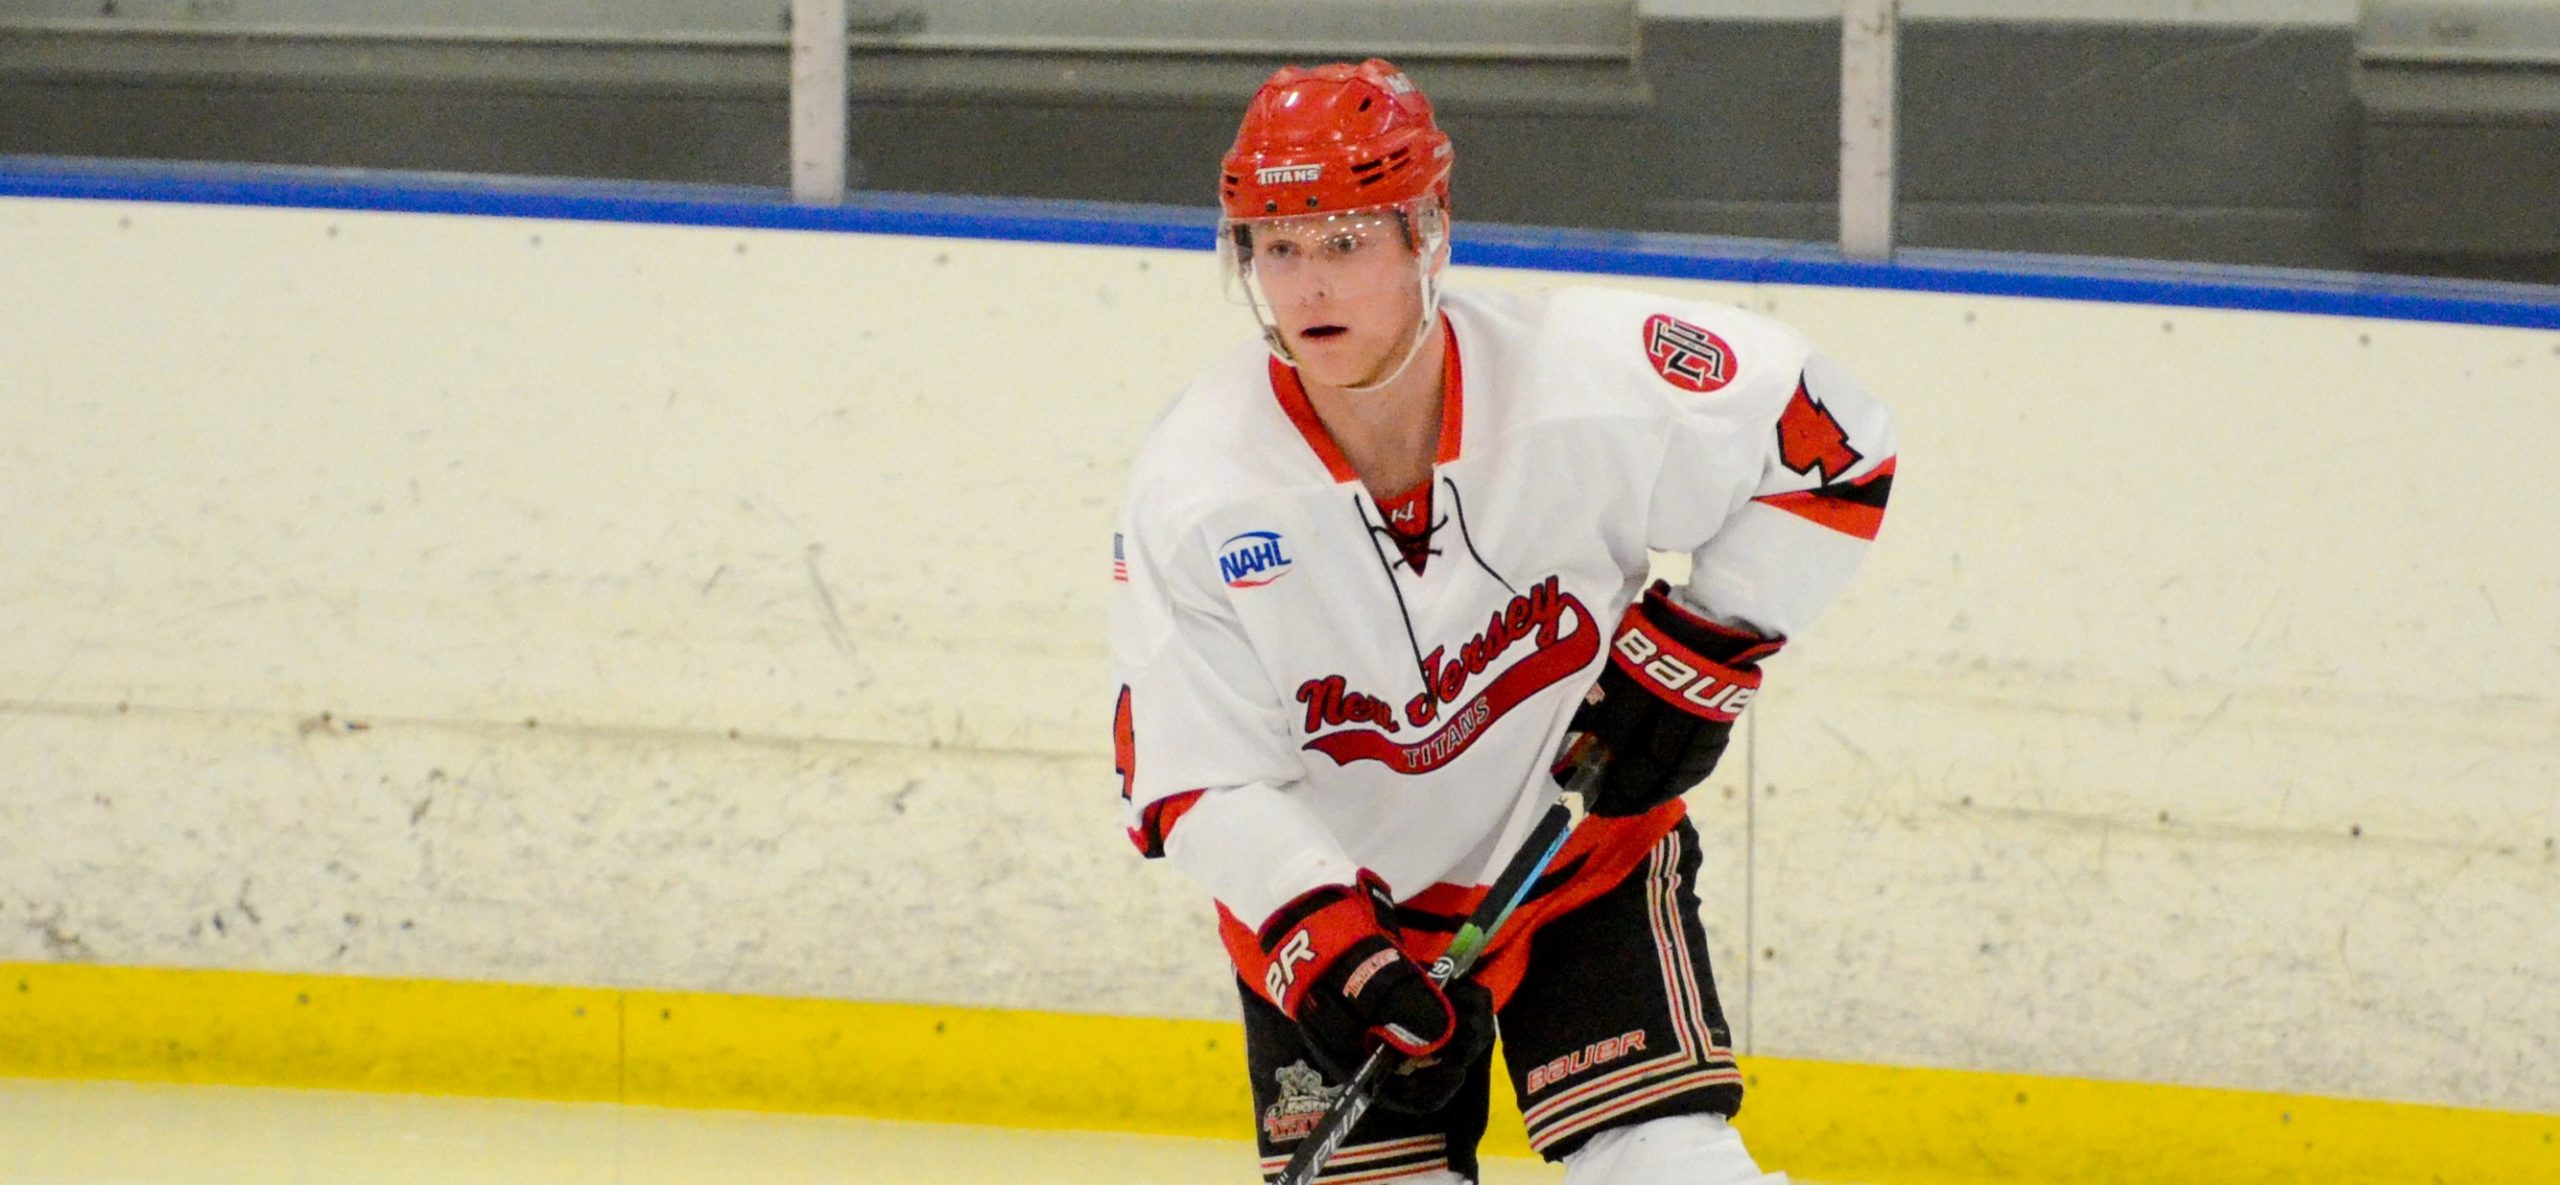 Zona named to the NAHL’s All-East Division Rookie Team